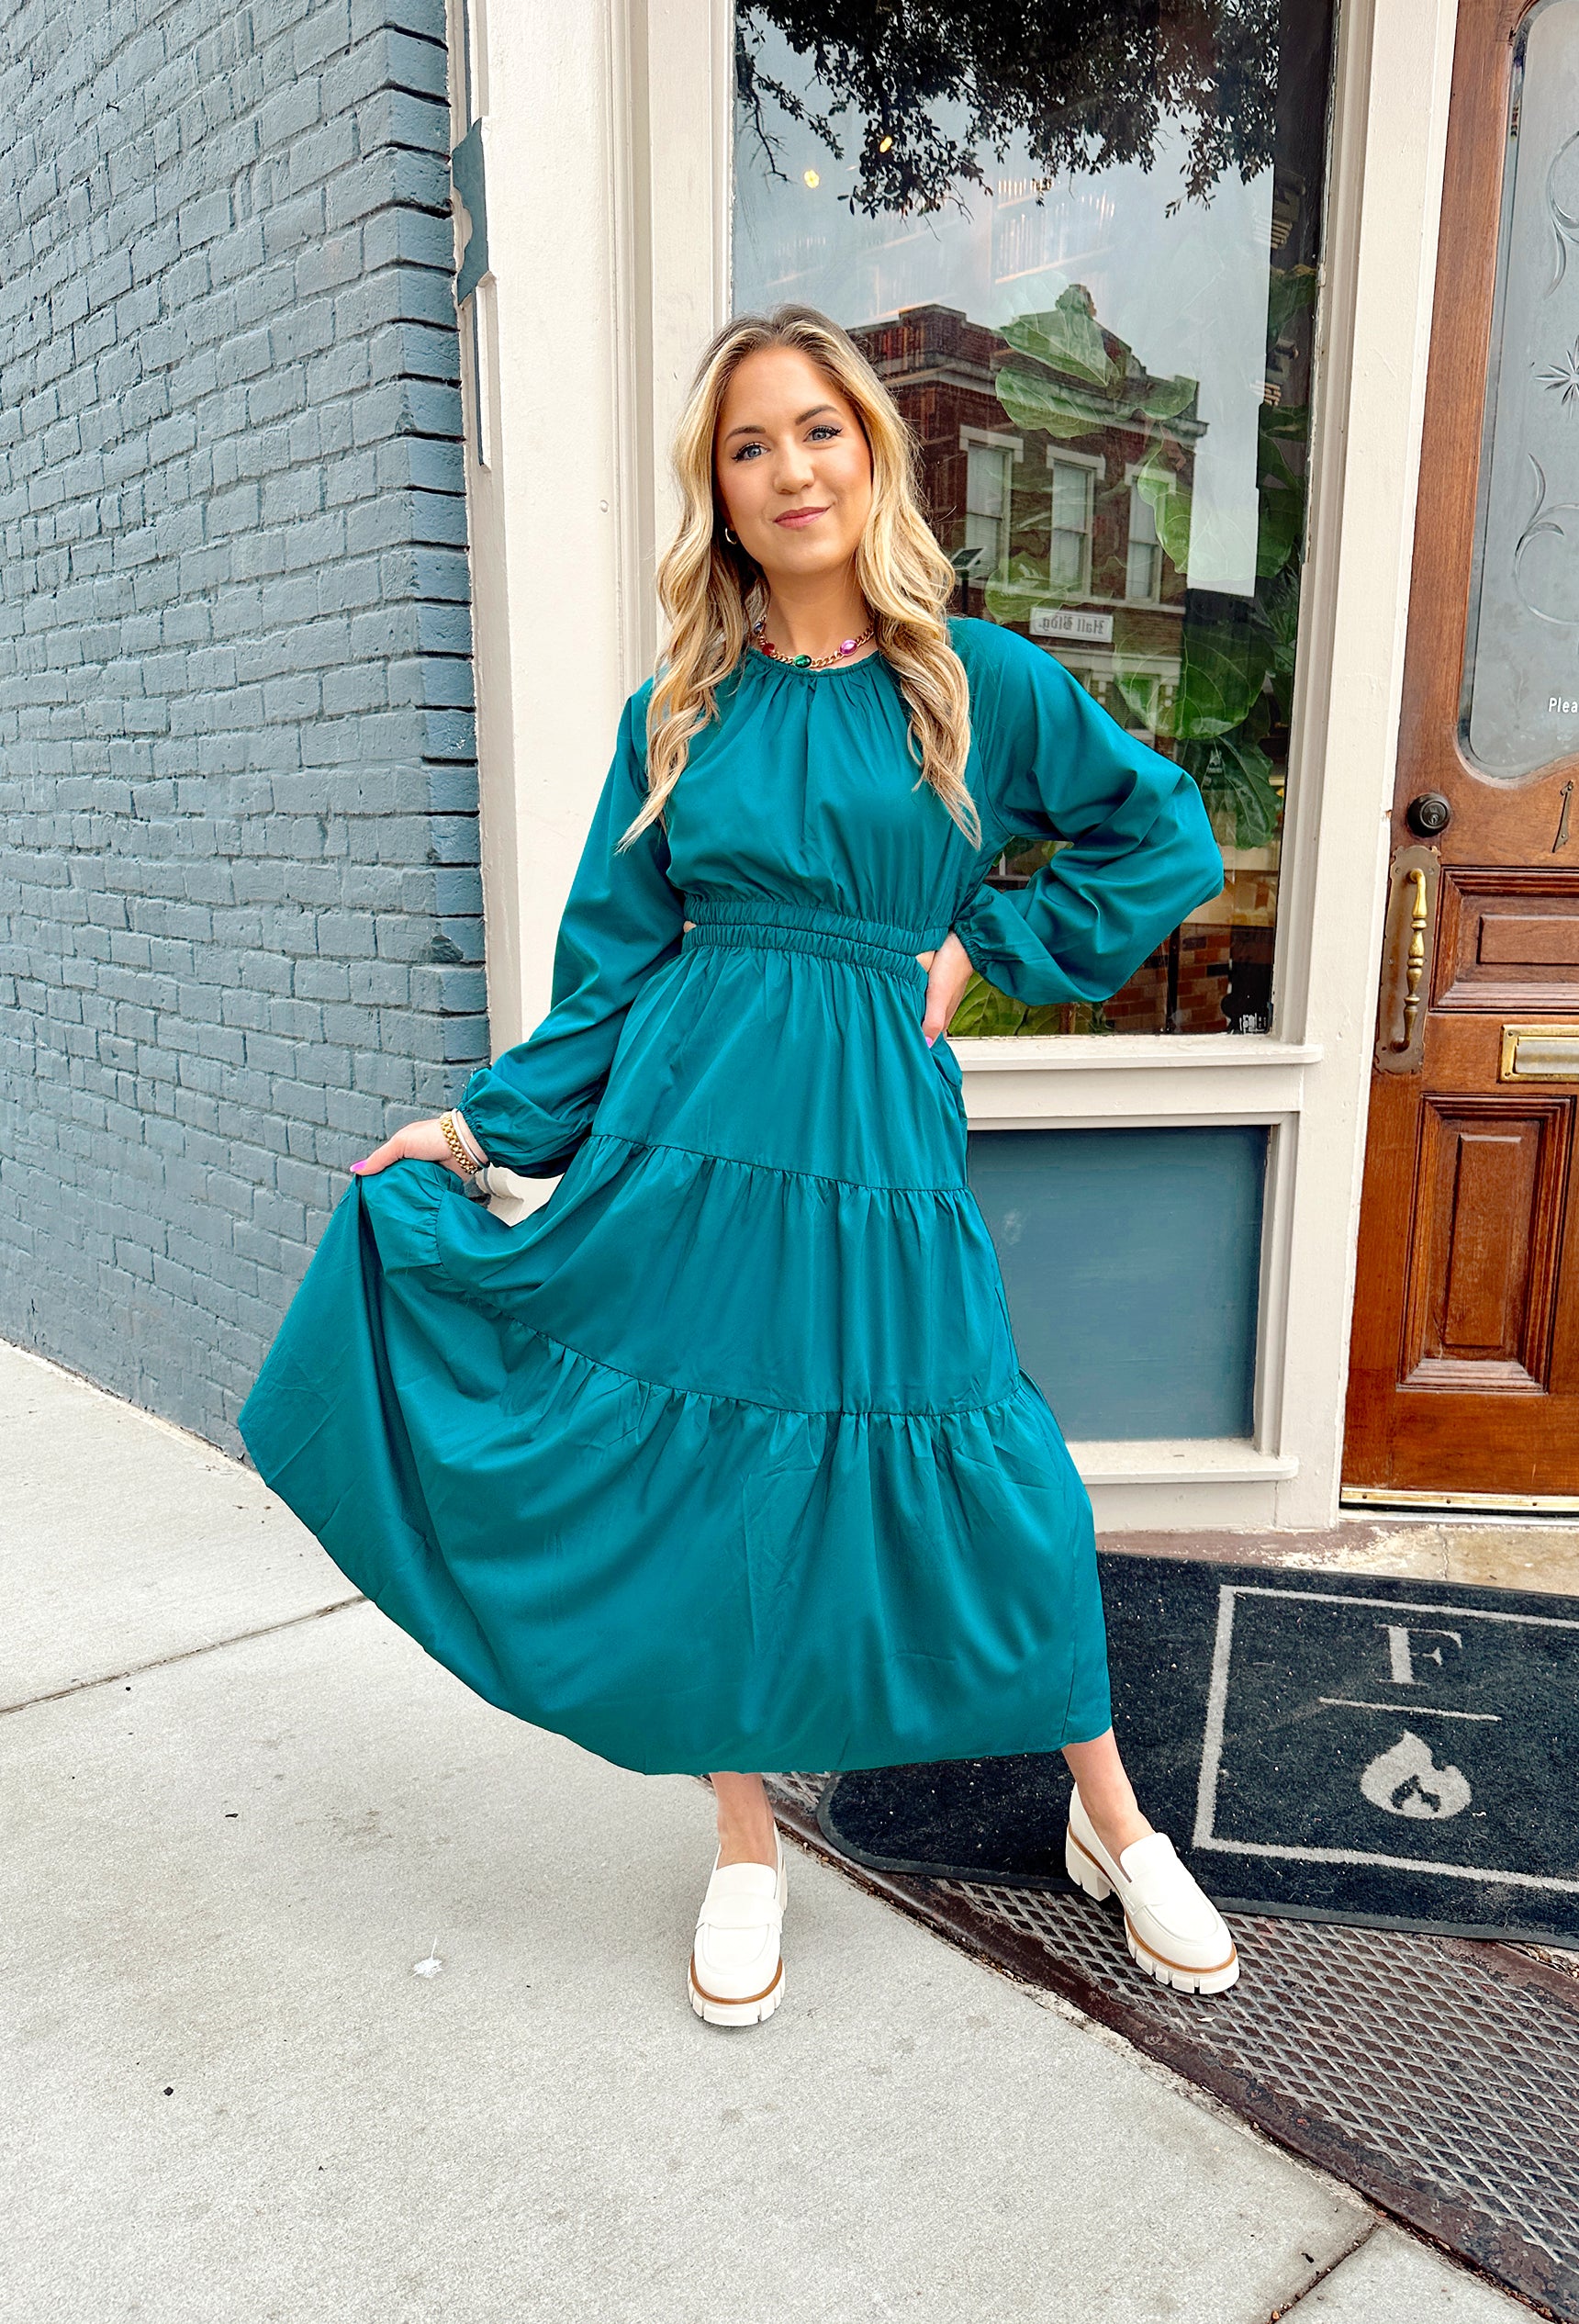 Into The Blue Midi Dress, long sleeve tiered dress with blouse sleeves and open back